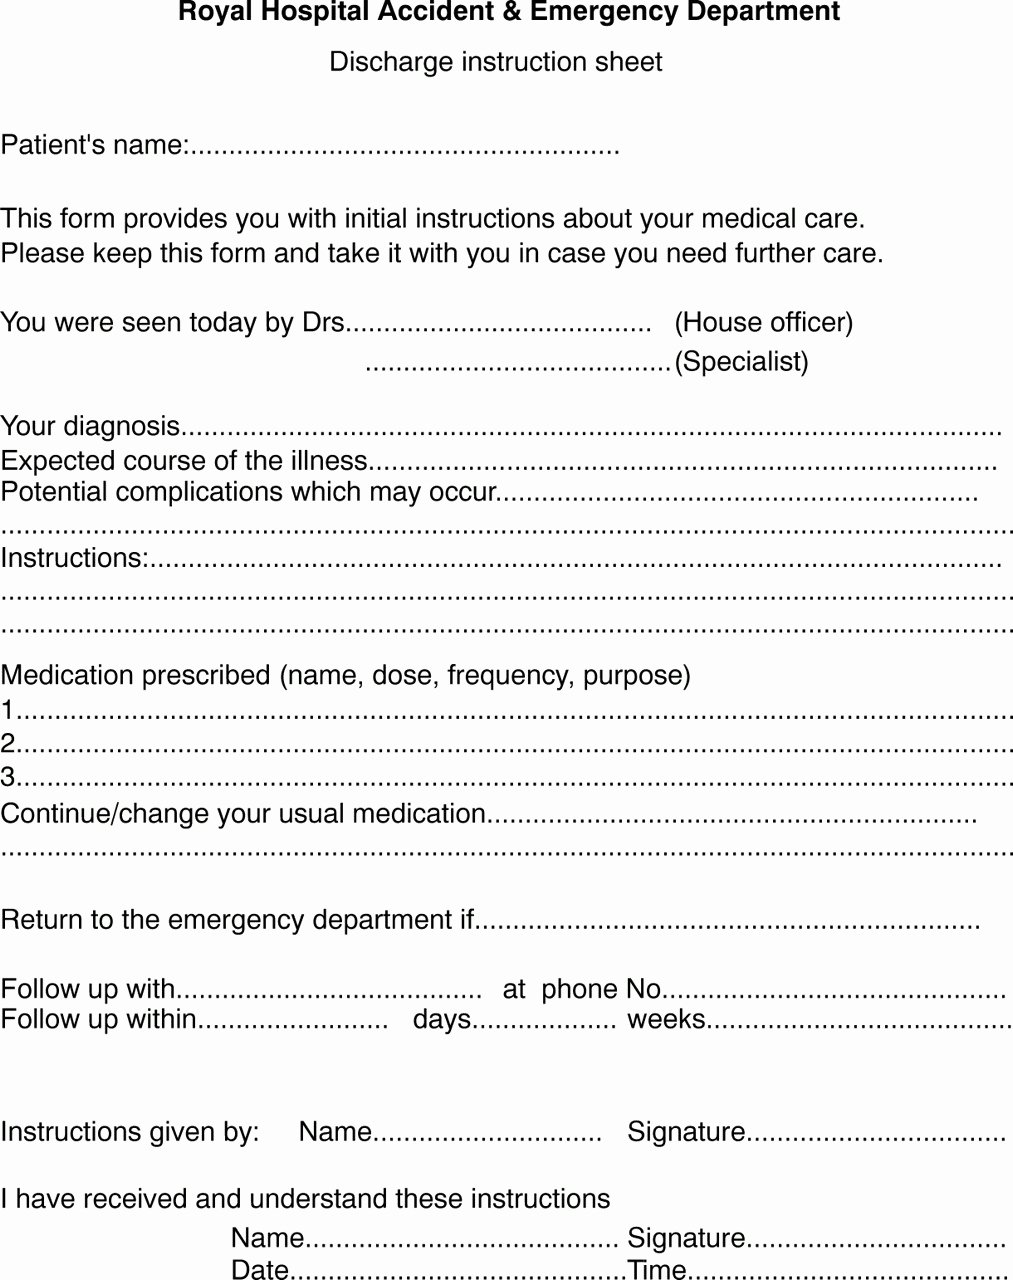 Discharge Instructions for Emergency Department Patients